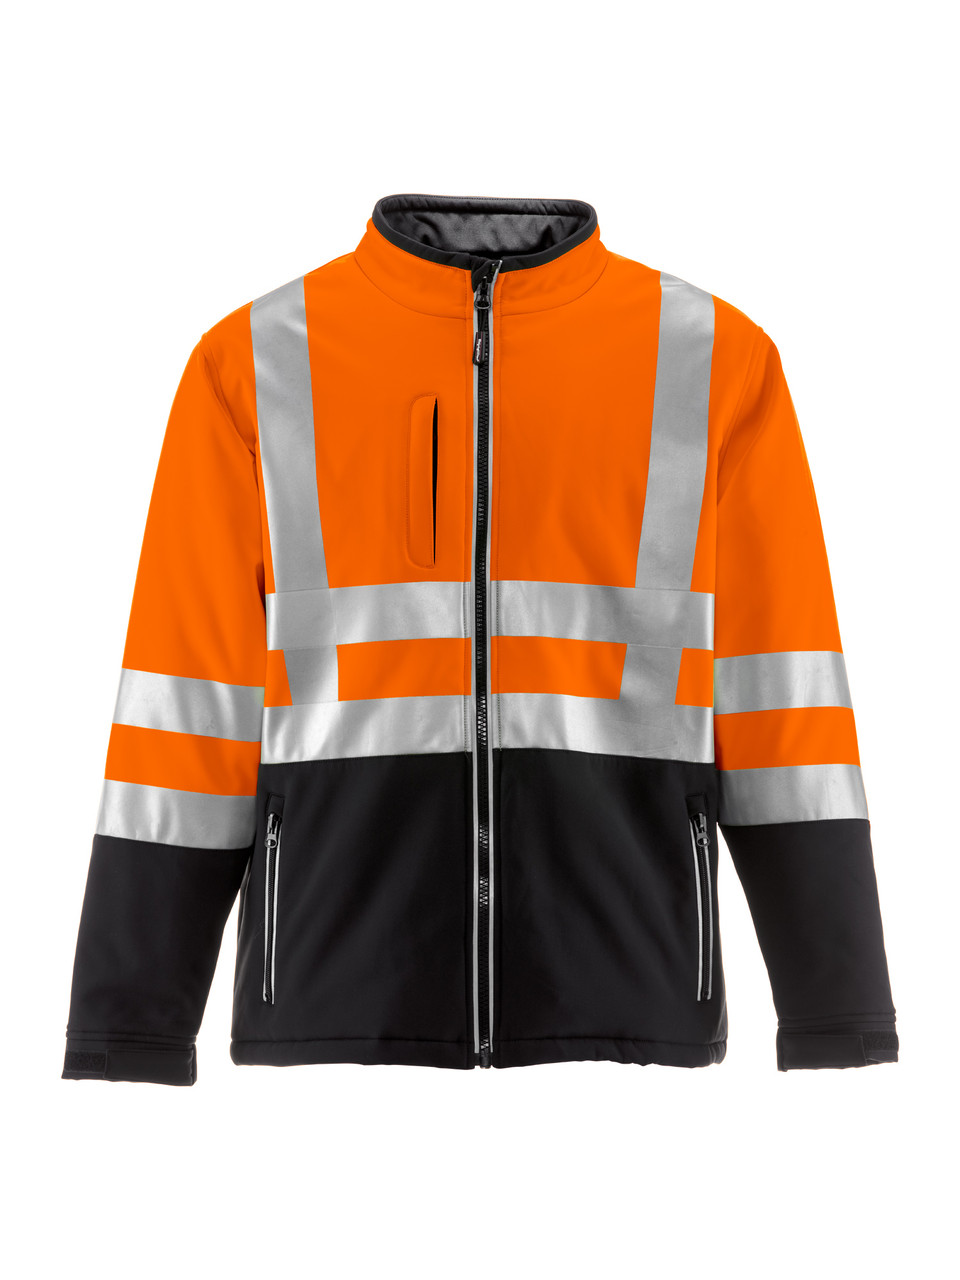 HiVis Insulated Softshell Jacket (496) | Rated for -20°F | RefrigiWear